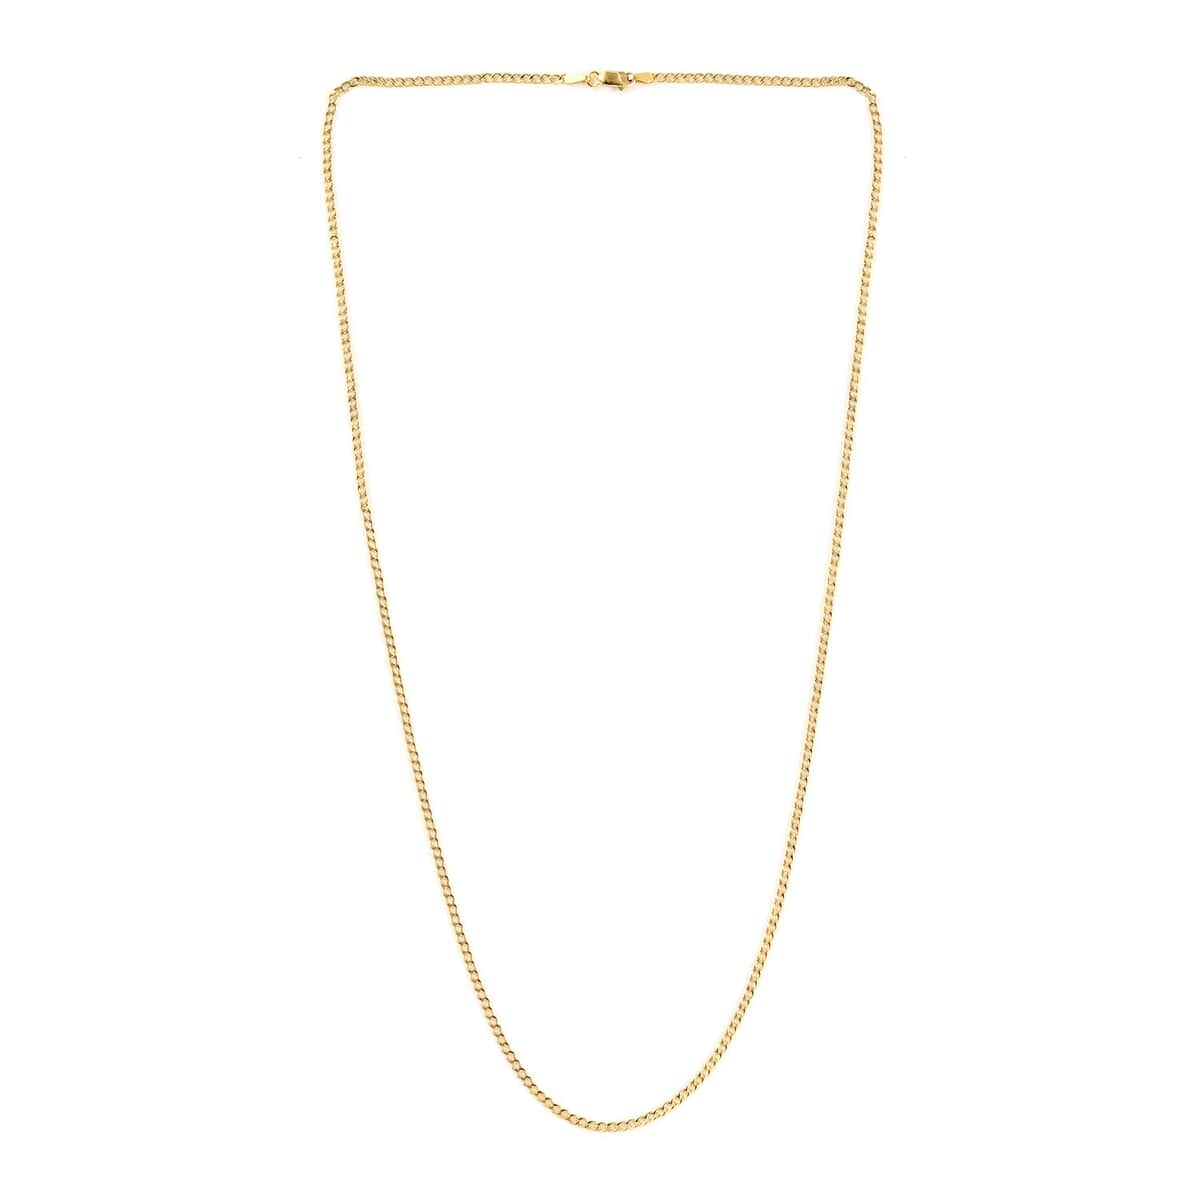 New York Closeout 10K Yellow Gold 2mm Cuban Chain Necklace 18 Inches 1.50 Grams (Delivery in 7-10 Business Days) image number 1